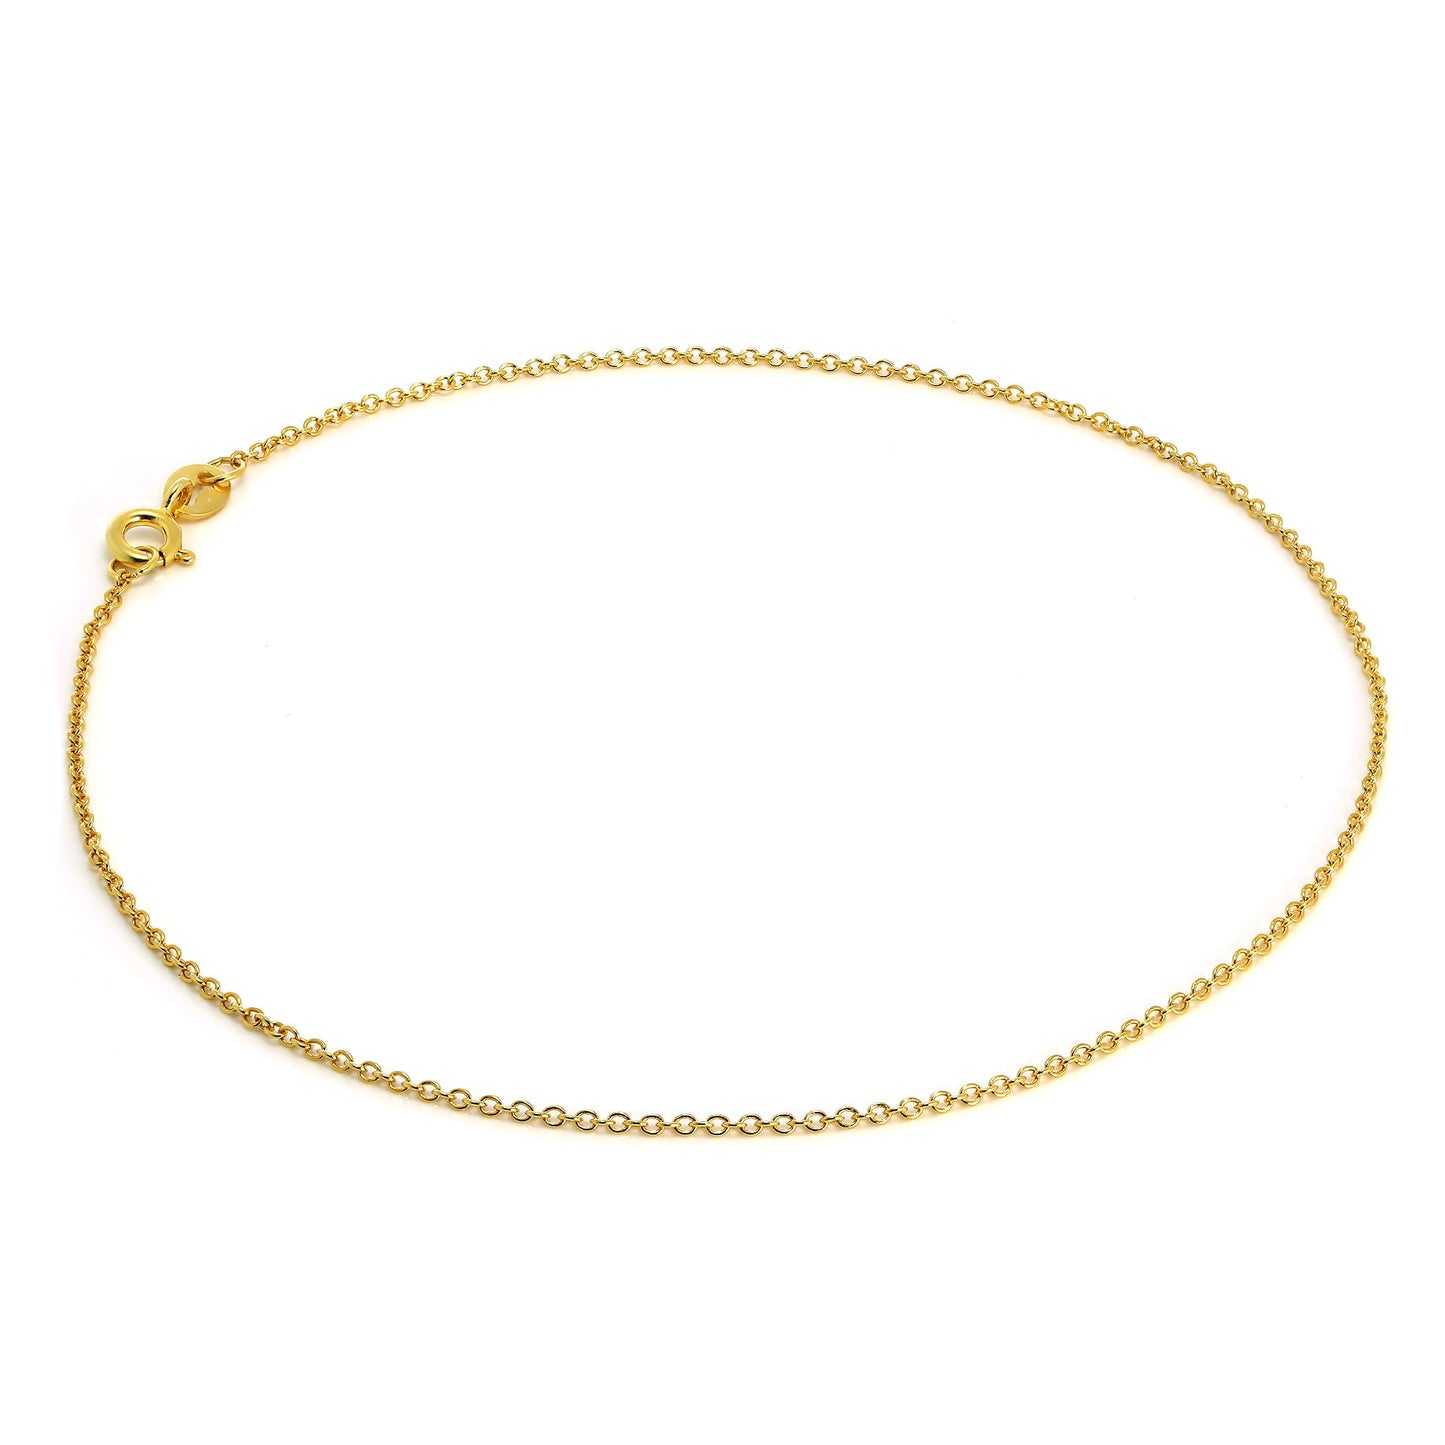 Gold Plated Sterling Silver Fine Trace Chain Anklet